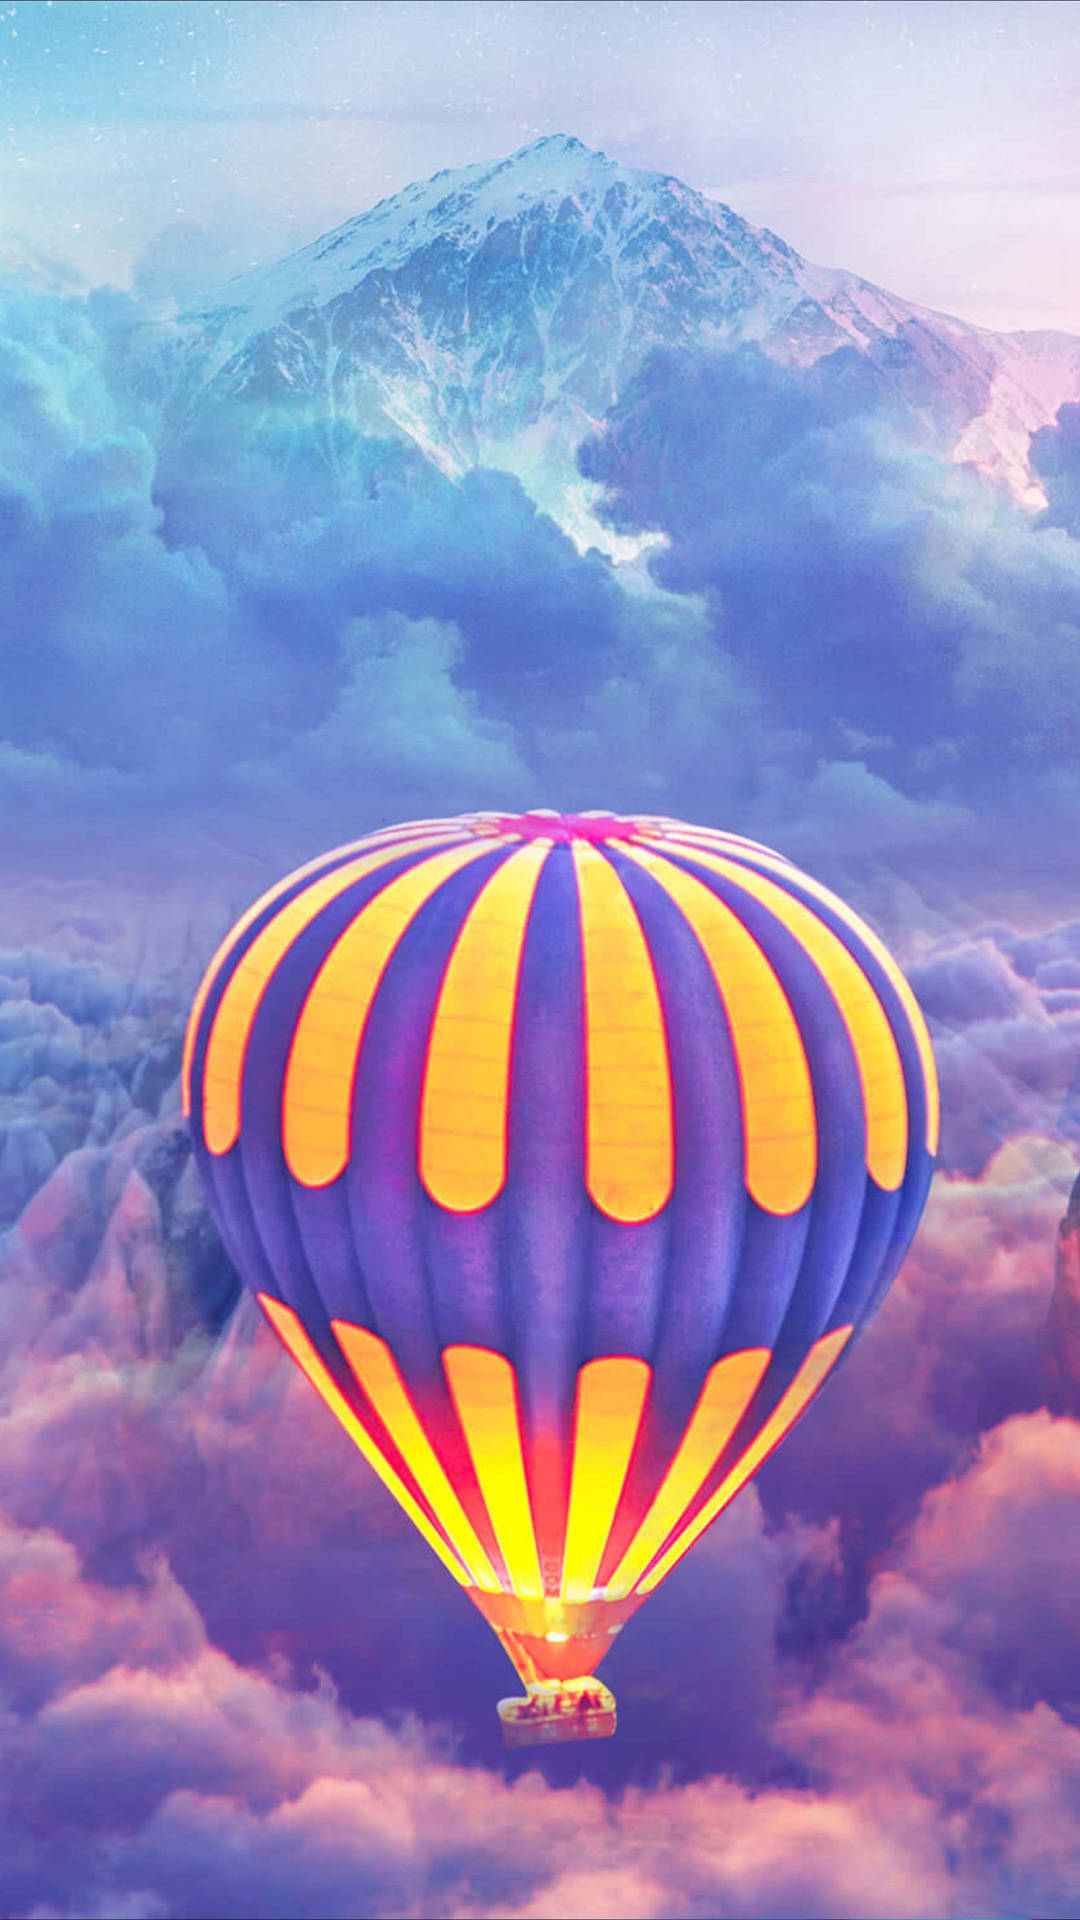 Hot Air Balloon Surrounded By Clouds Wallpaper